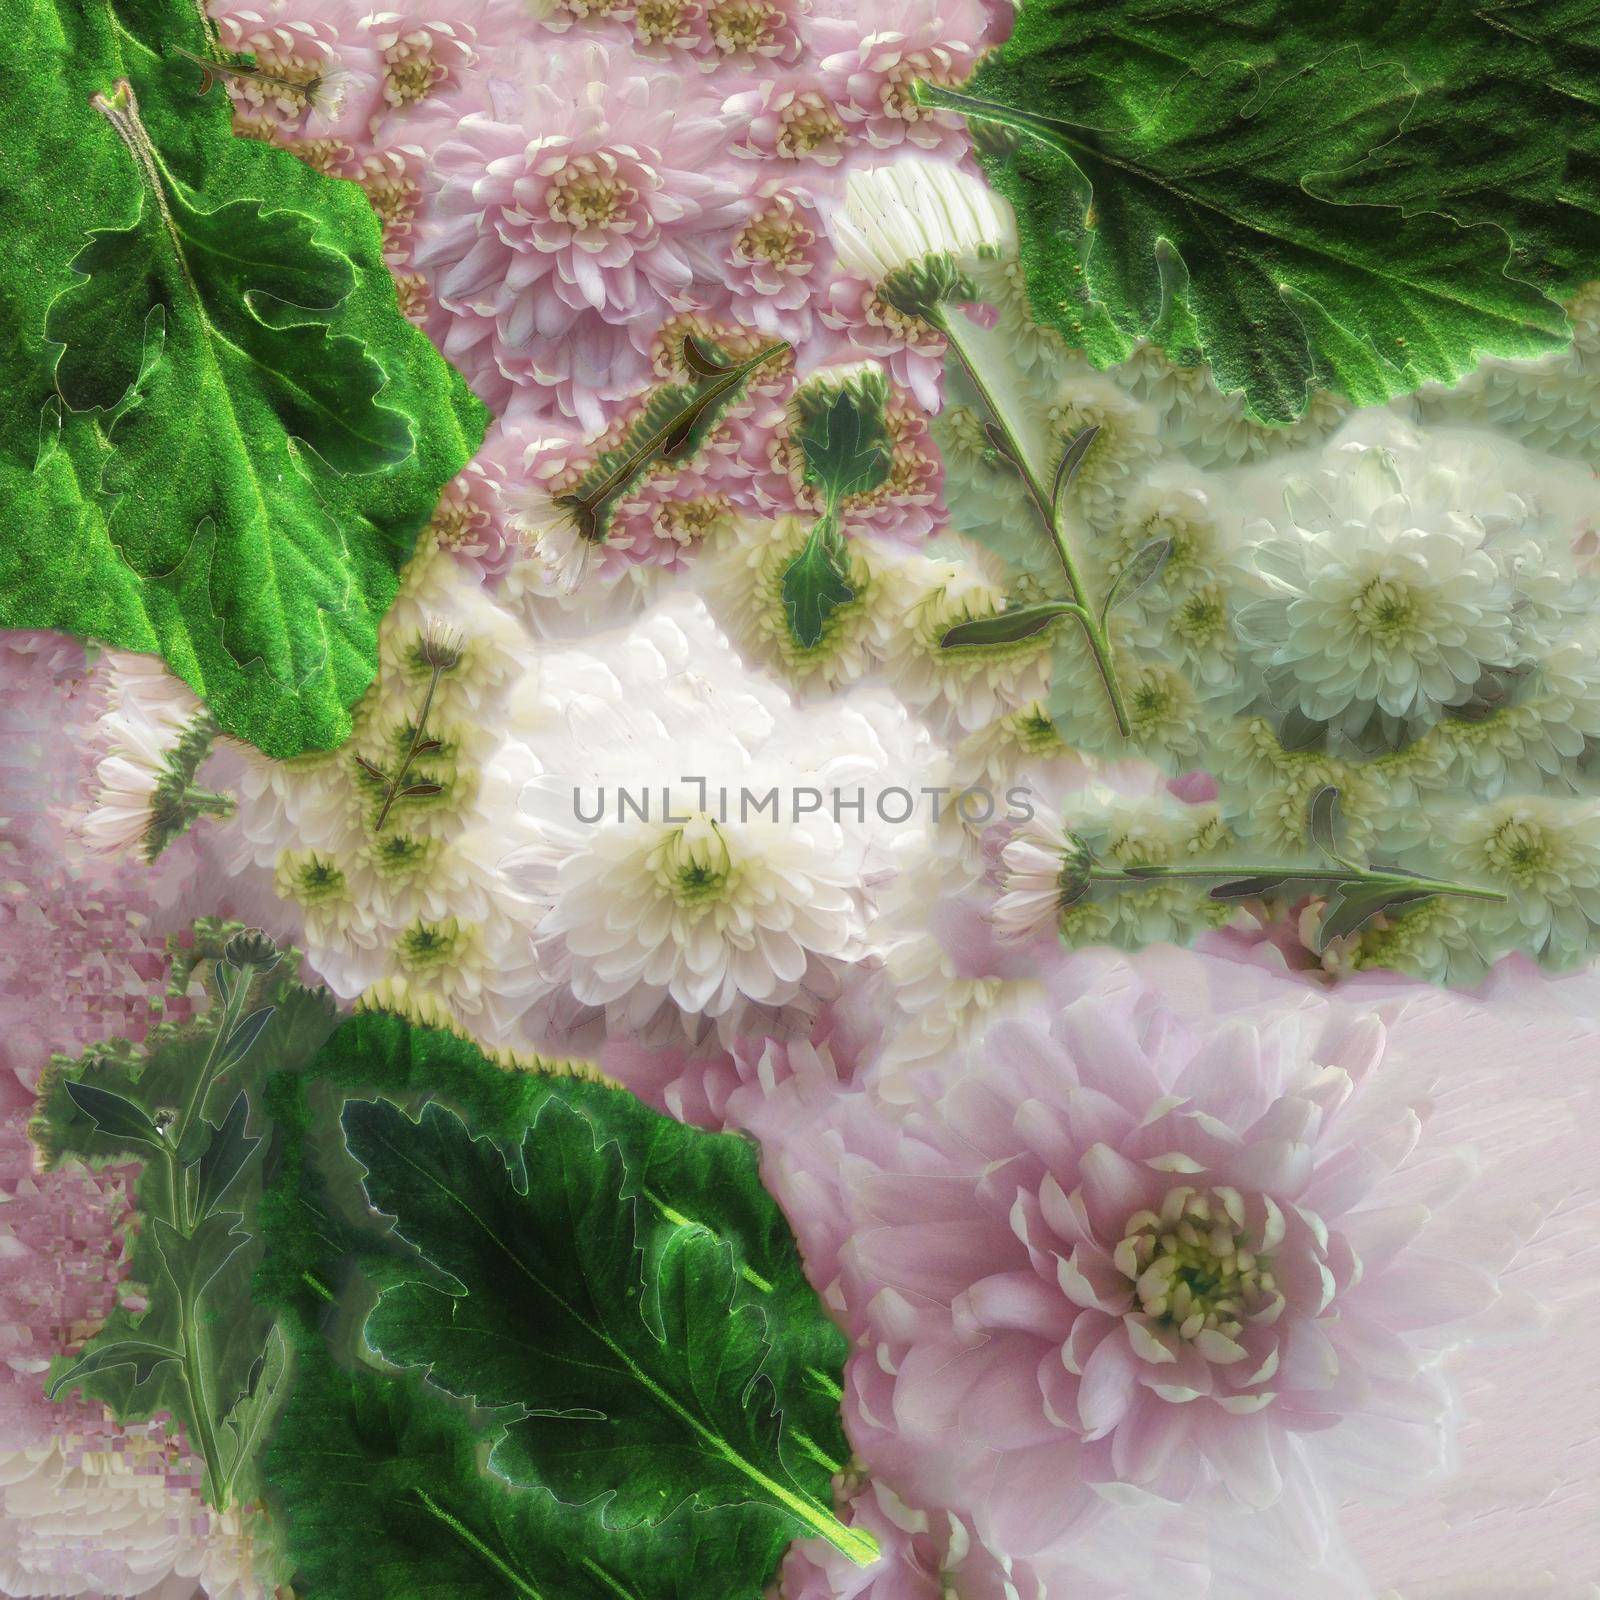 Abstract backround of pink and white chrysanthemums with green leaves and twigs.